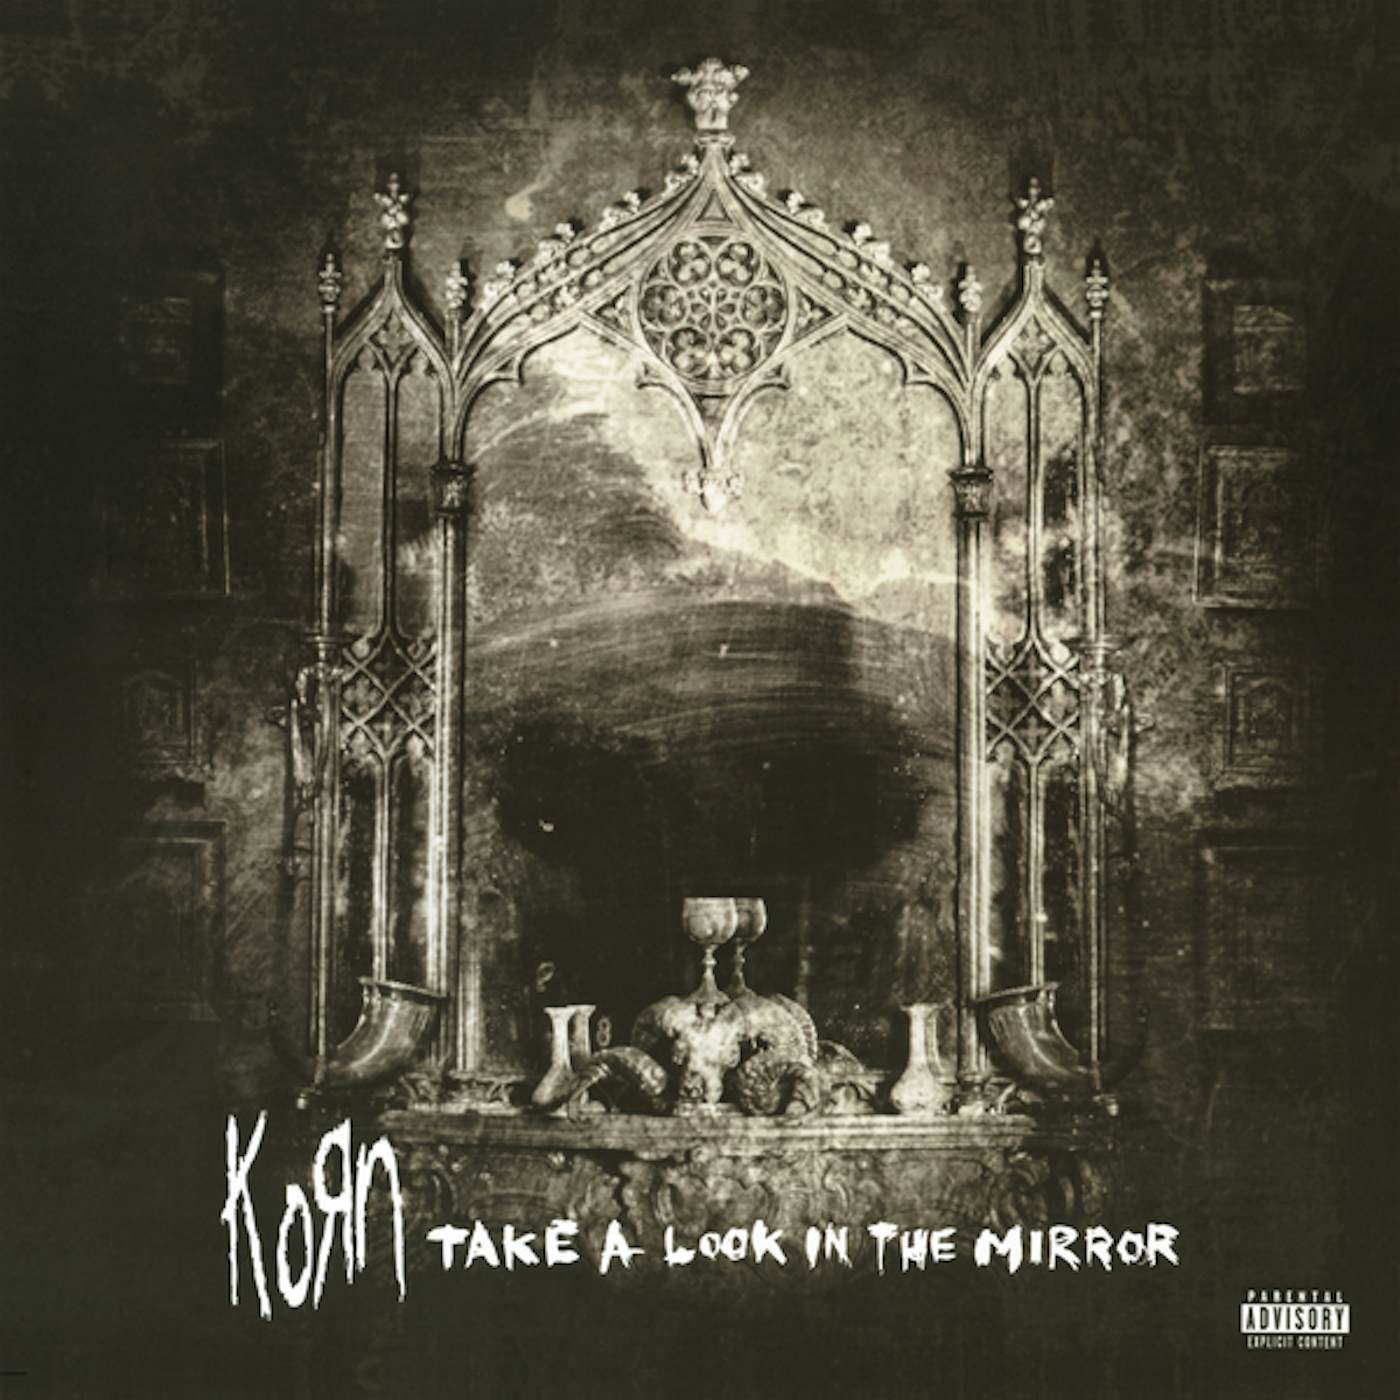 Korn TAKE A LOOK IN THE MIRROR (2 LP) (140G) Vinyl Record